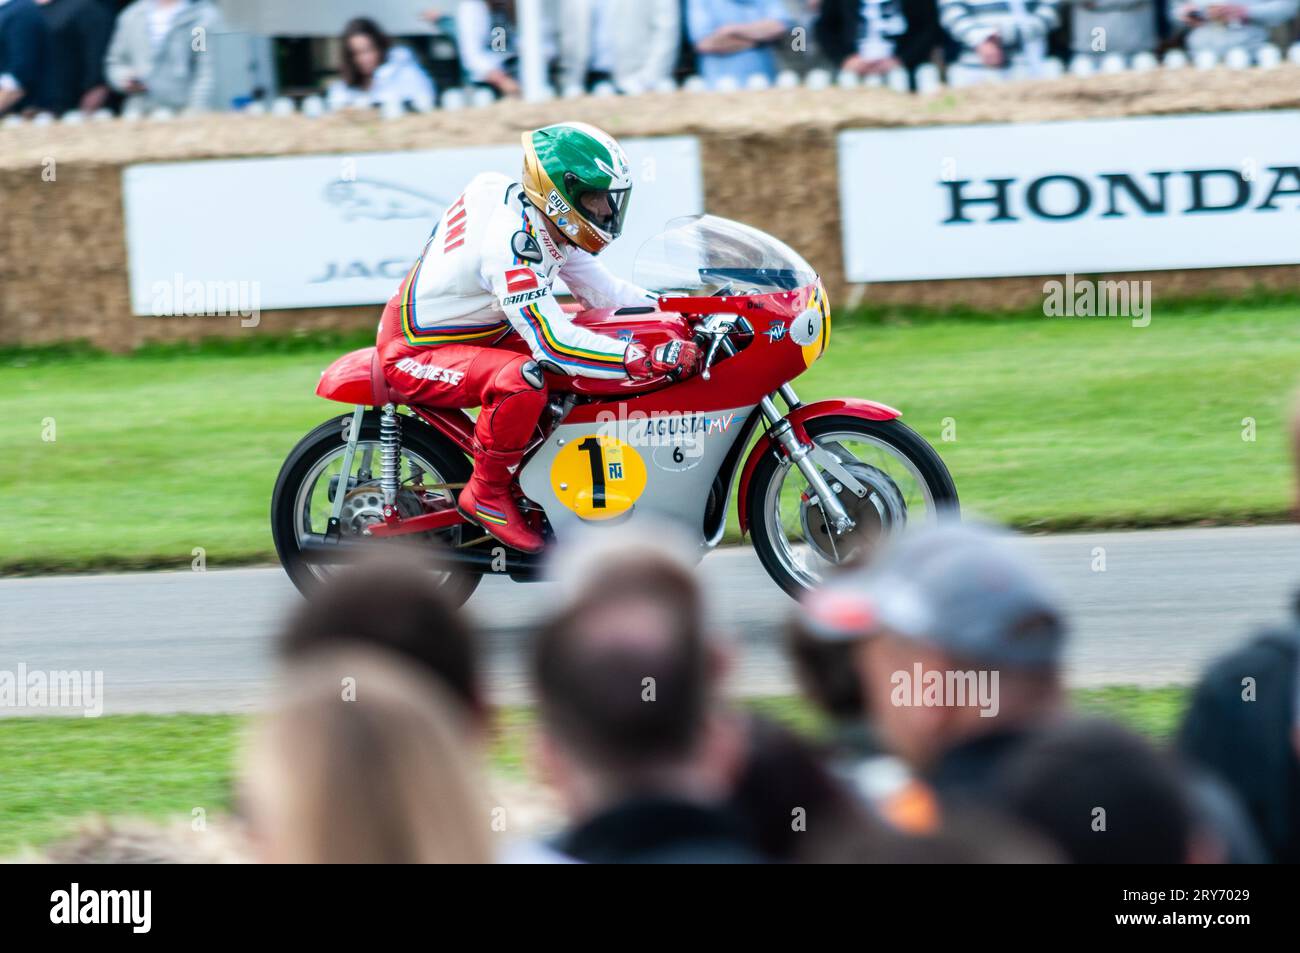 MV Agusta 500cc Three racing up the hill climb at the Goodwood Festival of Speed motorsport event, UK. Historic Grand Prix World Champion motorcycle Stock Photo